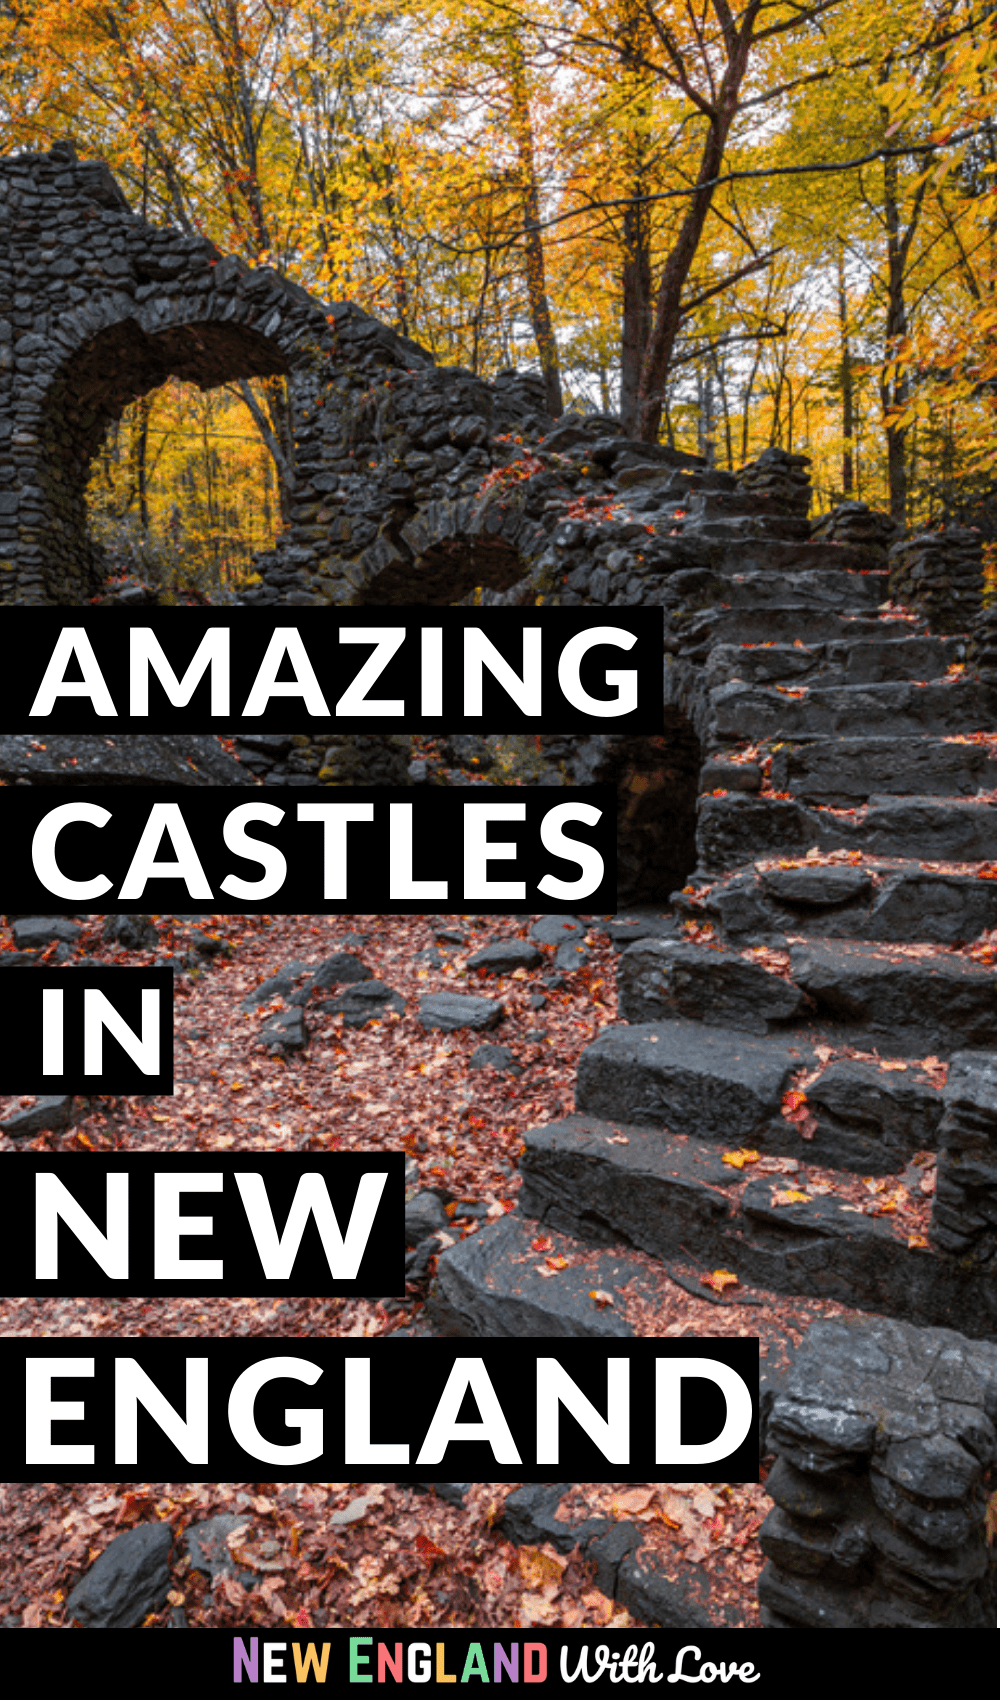 Pinterest graphic reading "AMAZING CASTLES IN NEW ENGLAND"